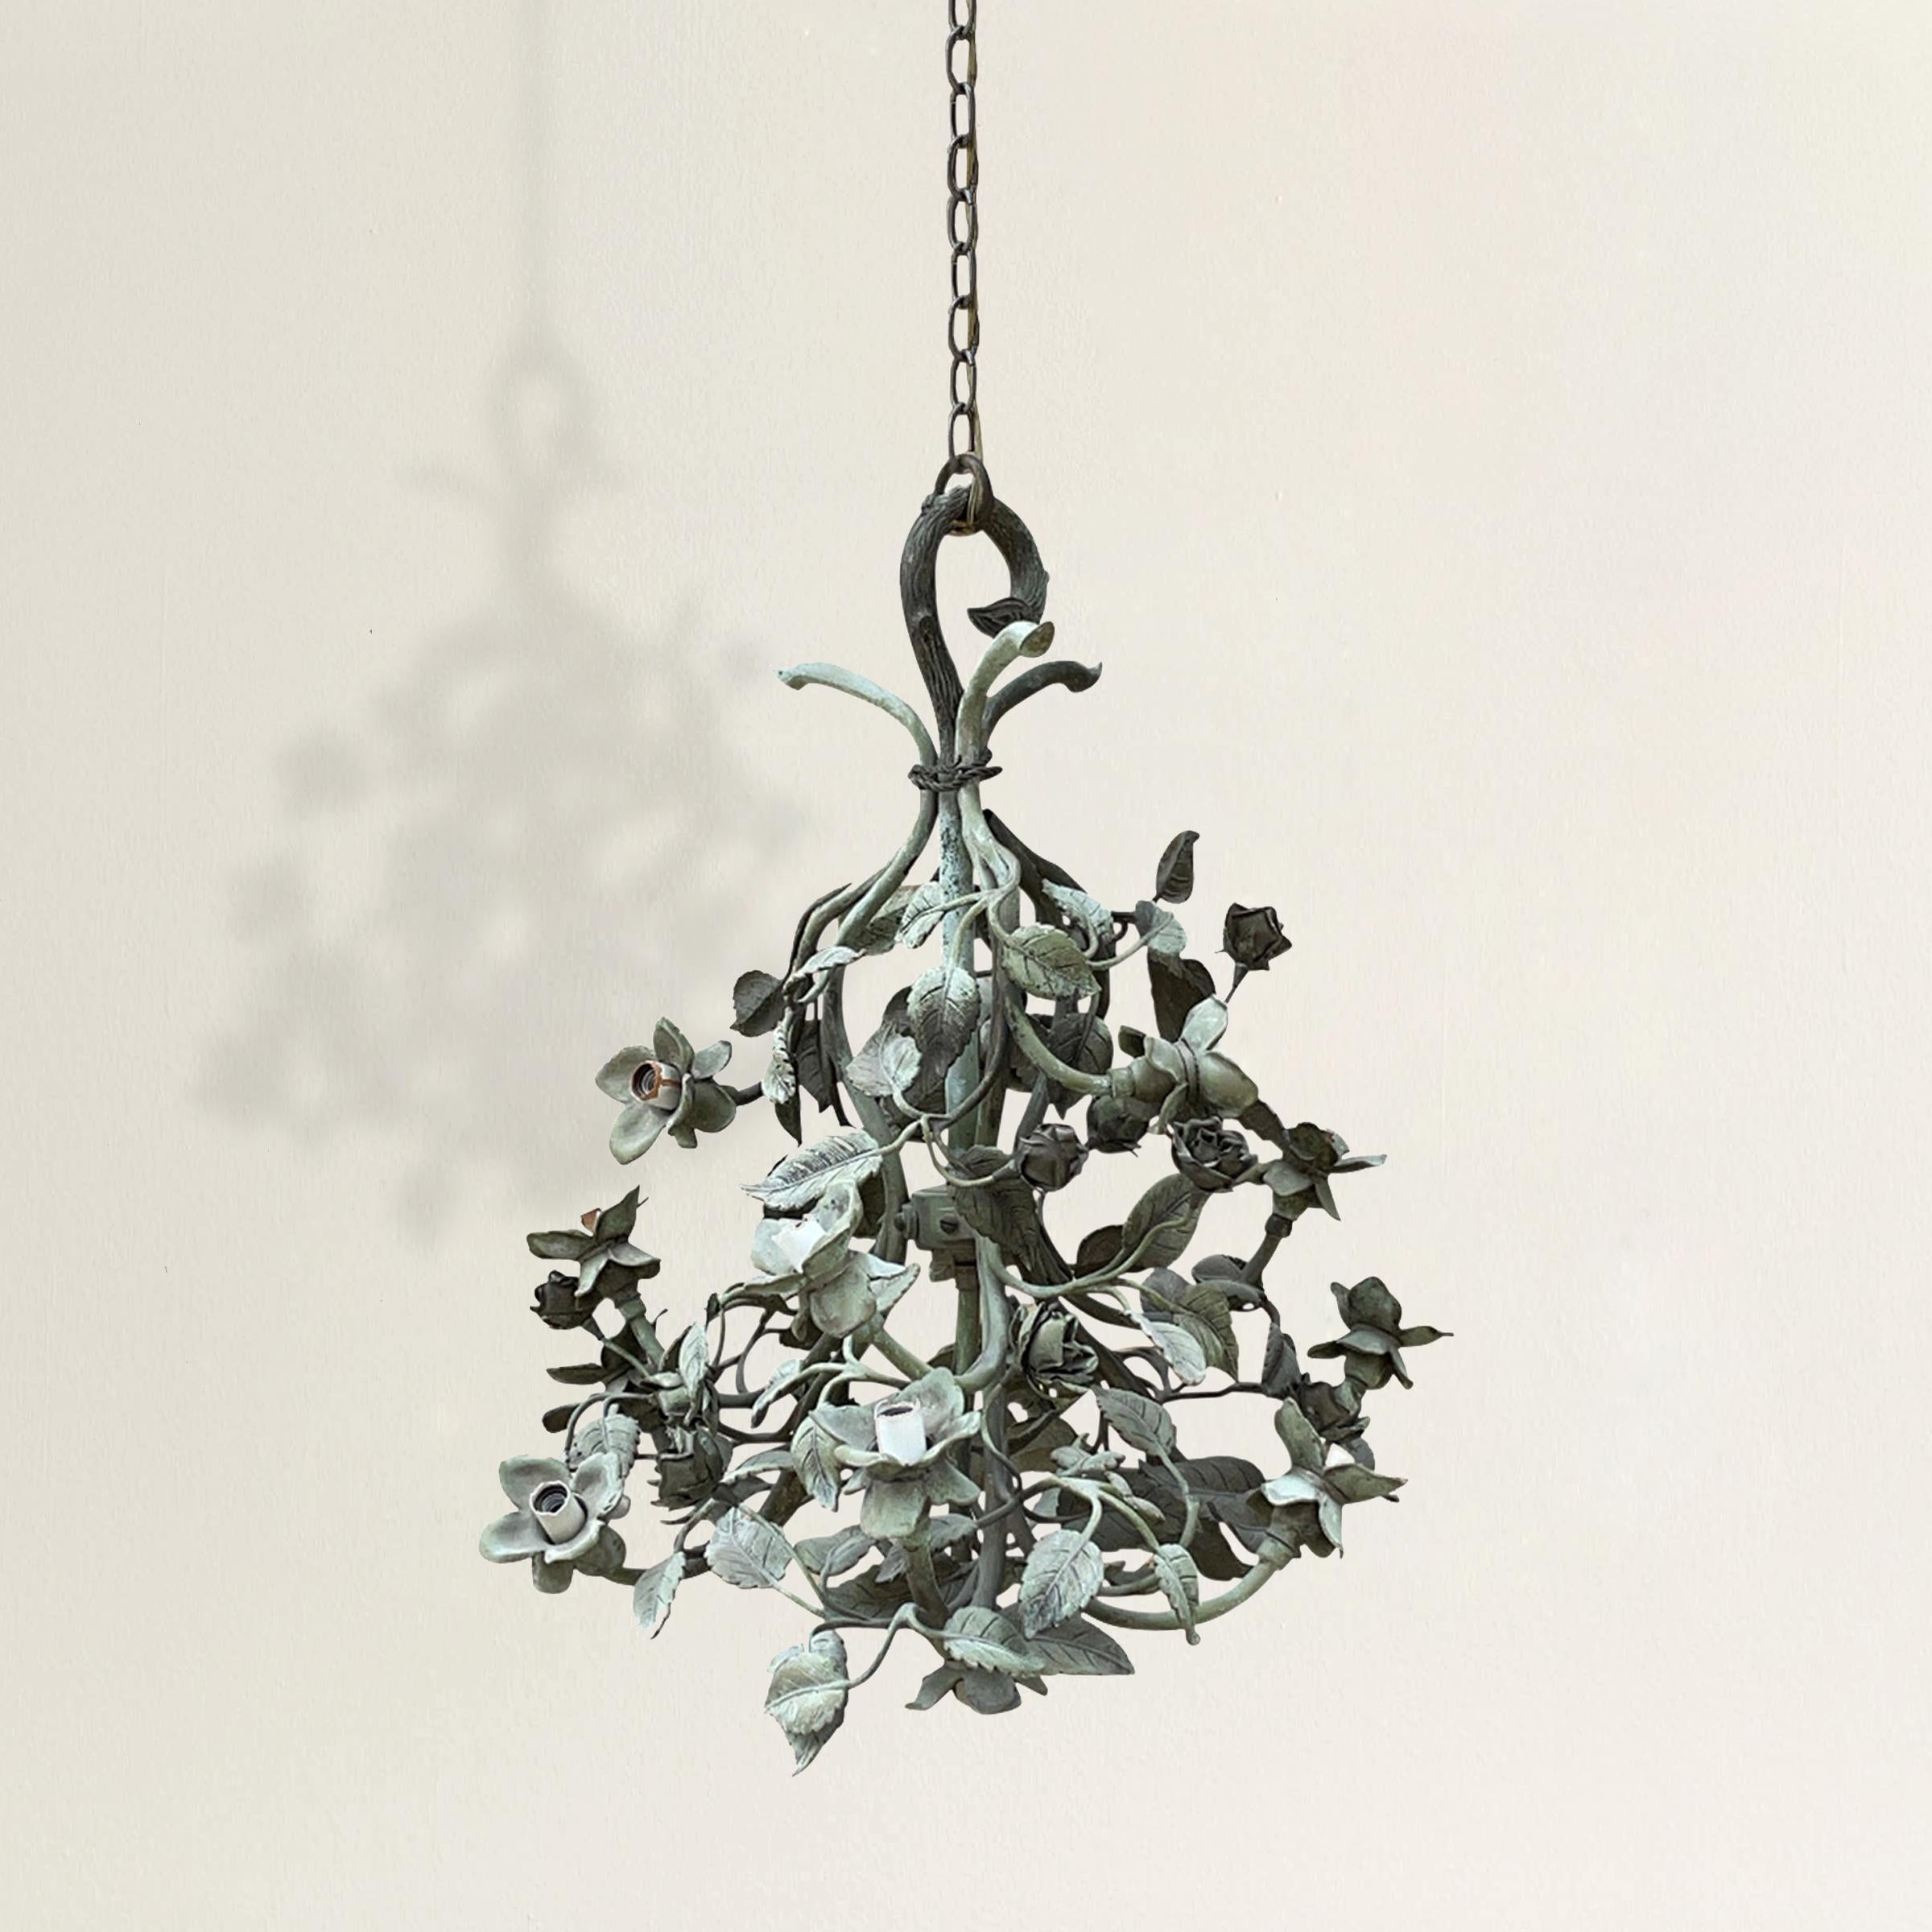 A charming and romantic early 20th century American cast bronze 'Secret Garden' chandelier built with three climbing rose branches joined at the top with a faux bois hook, and twelve lights throughout the cluster and one in the center at the bottom.